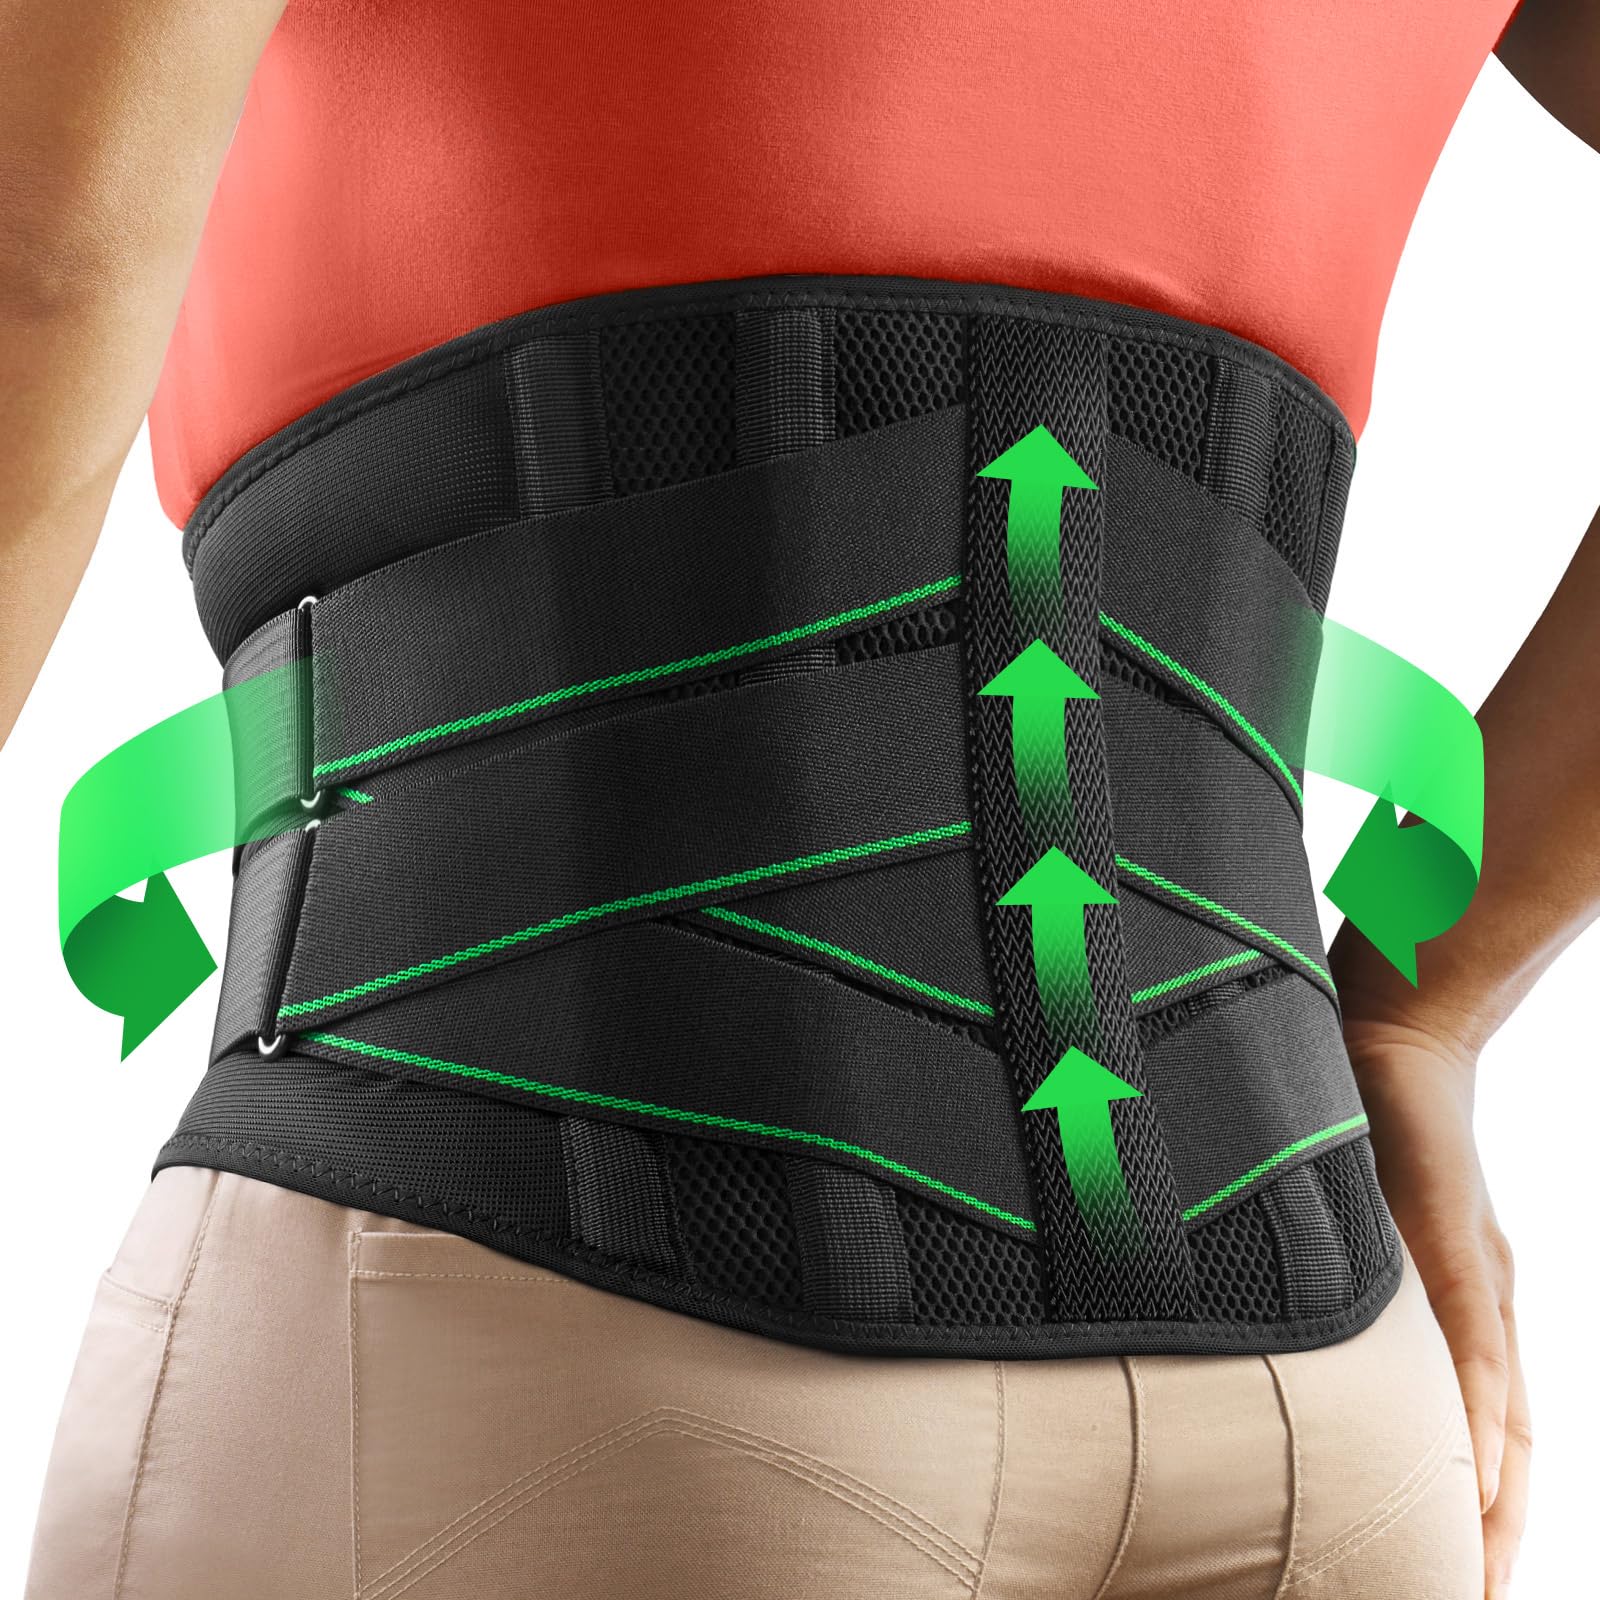 Back Brace Support Belt-Lumbar Support Back Brace for Lifting,Back Pain,  Sciatica, Scoliosis, Herniated Disc Adjustable Support Straps-Lower Back  Brace with Removable Lumbar Pad for Men & Women 